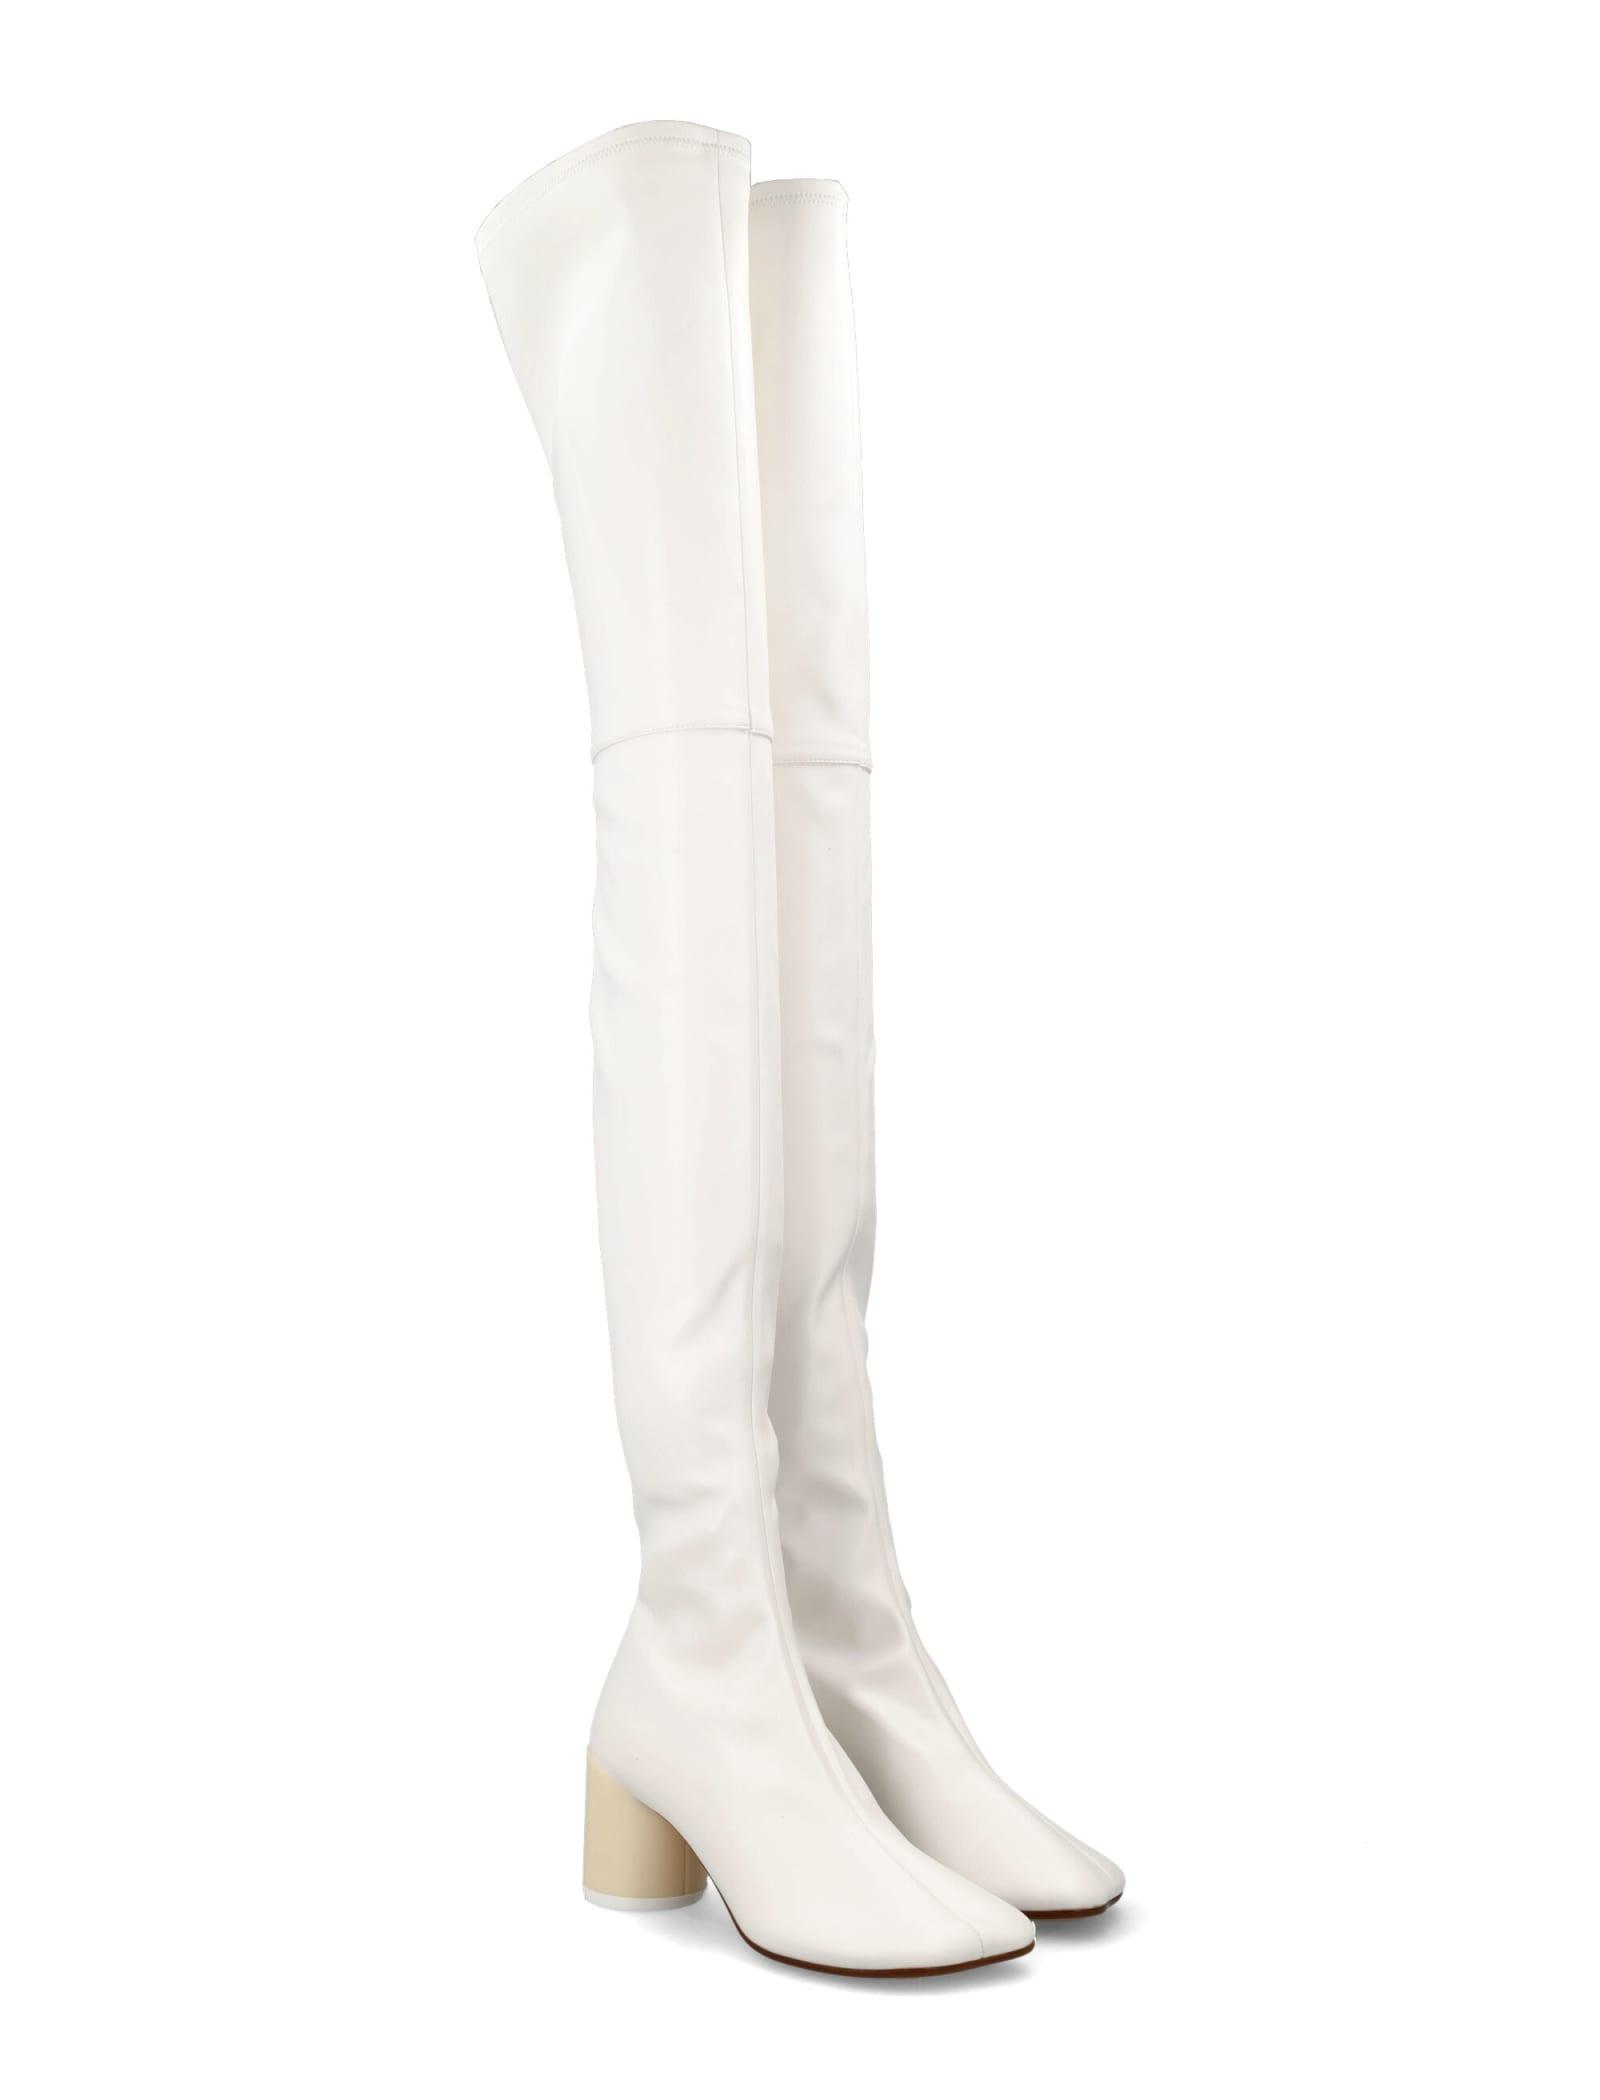 MM6 by Maison Martin Margiela Synthetic Overknee Boots in White | Lyst